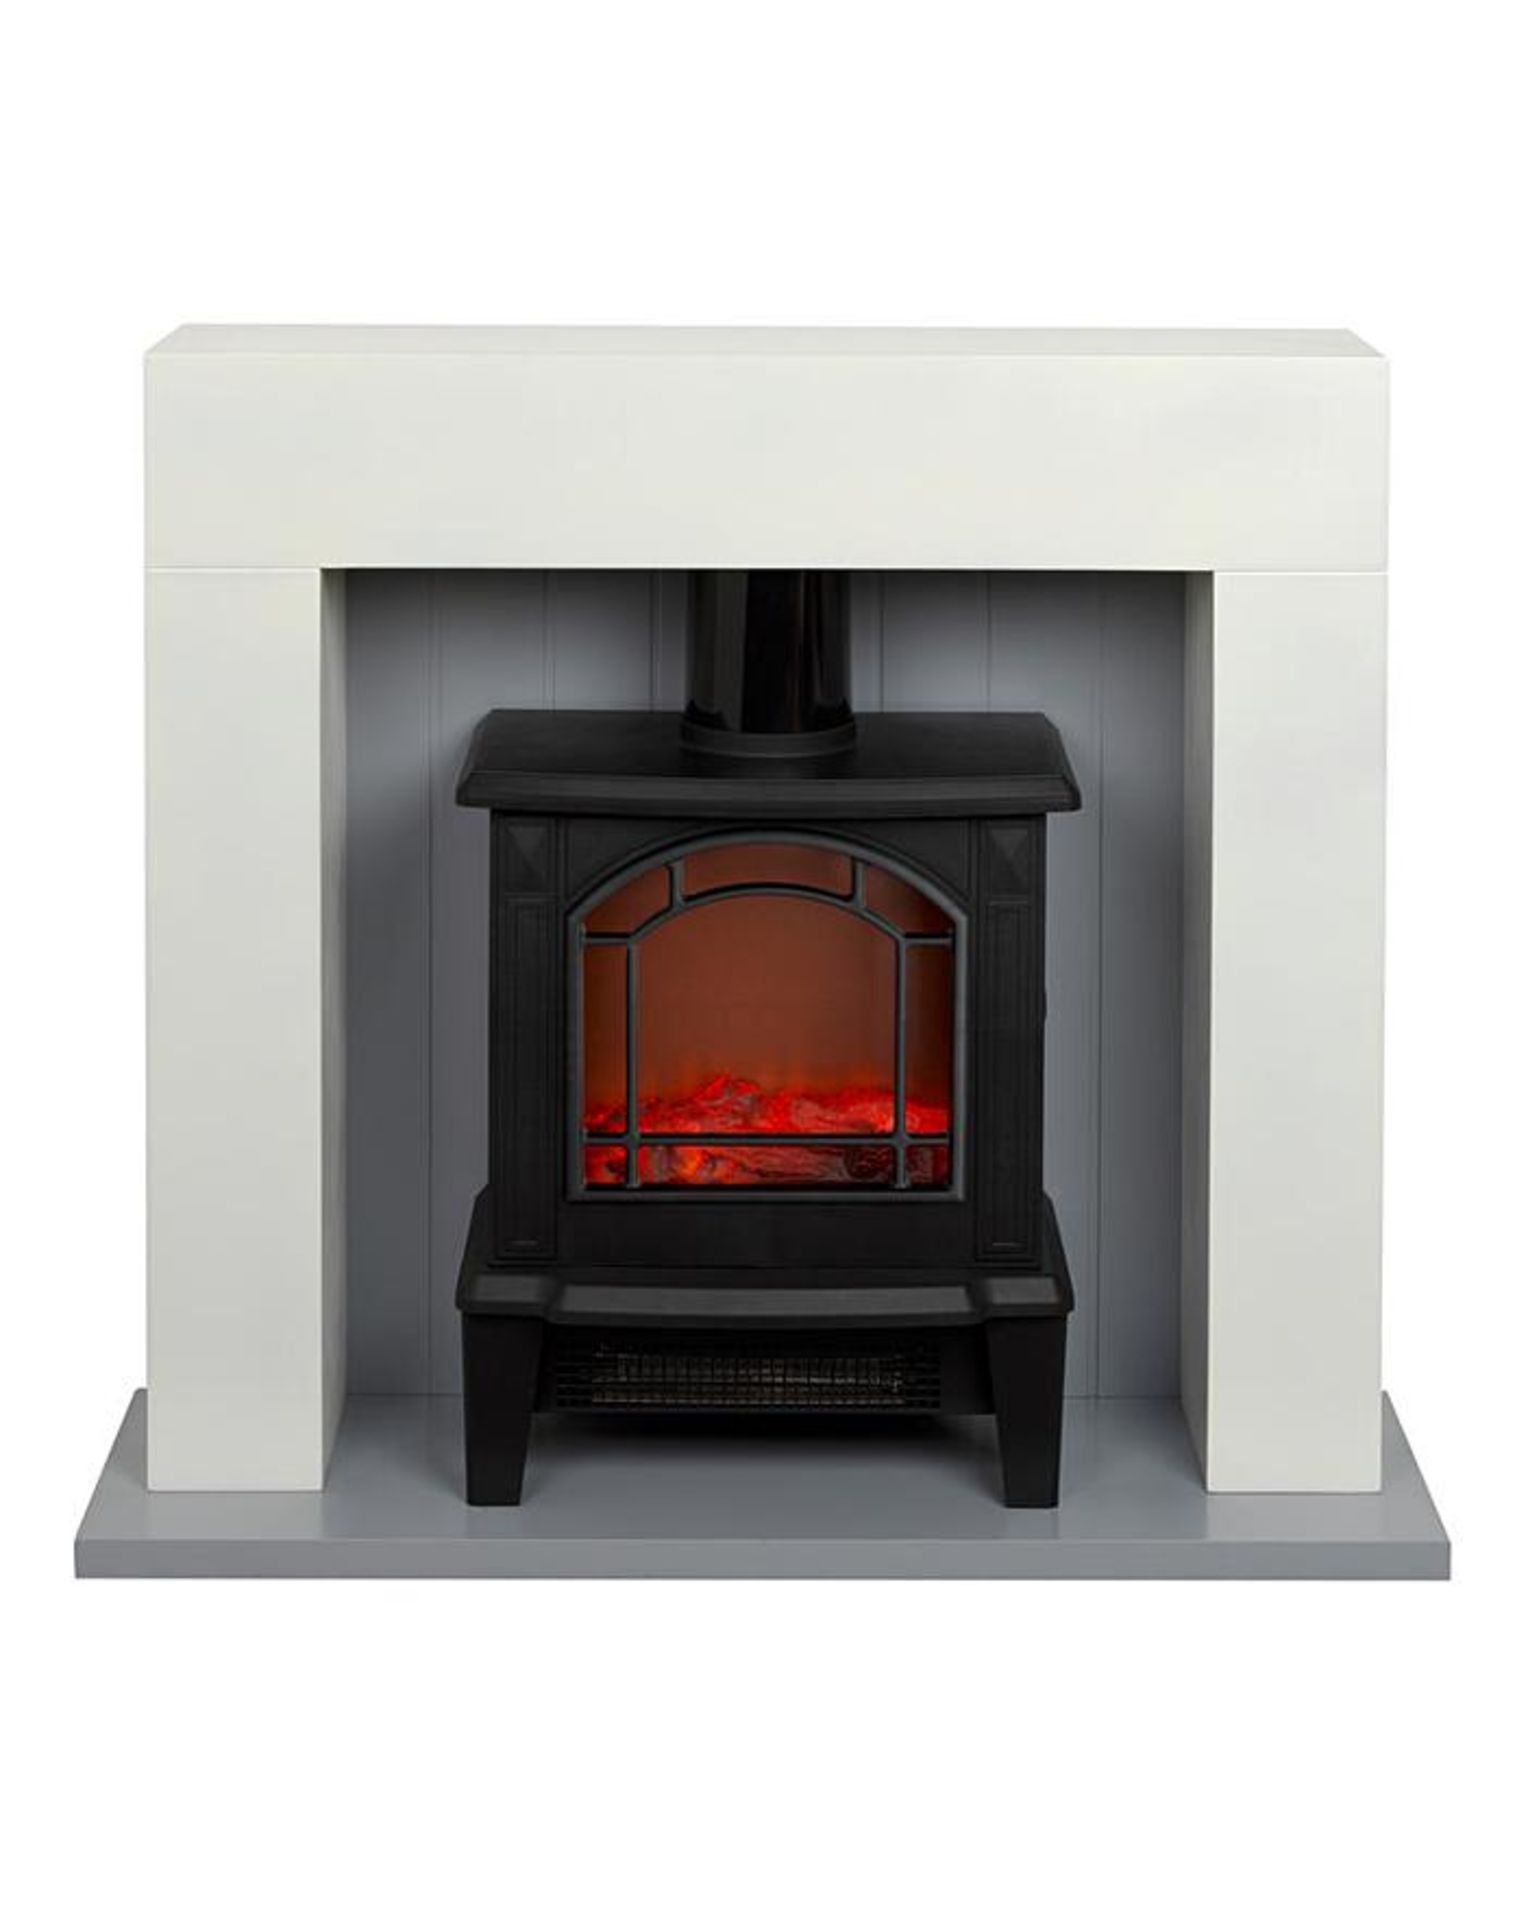 Beldray Floriana Electric Stove Fire Suite RRP £299.98 (117997)